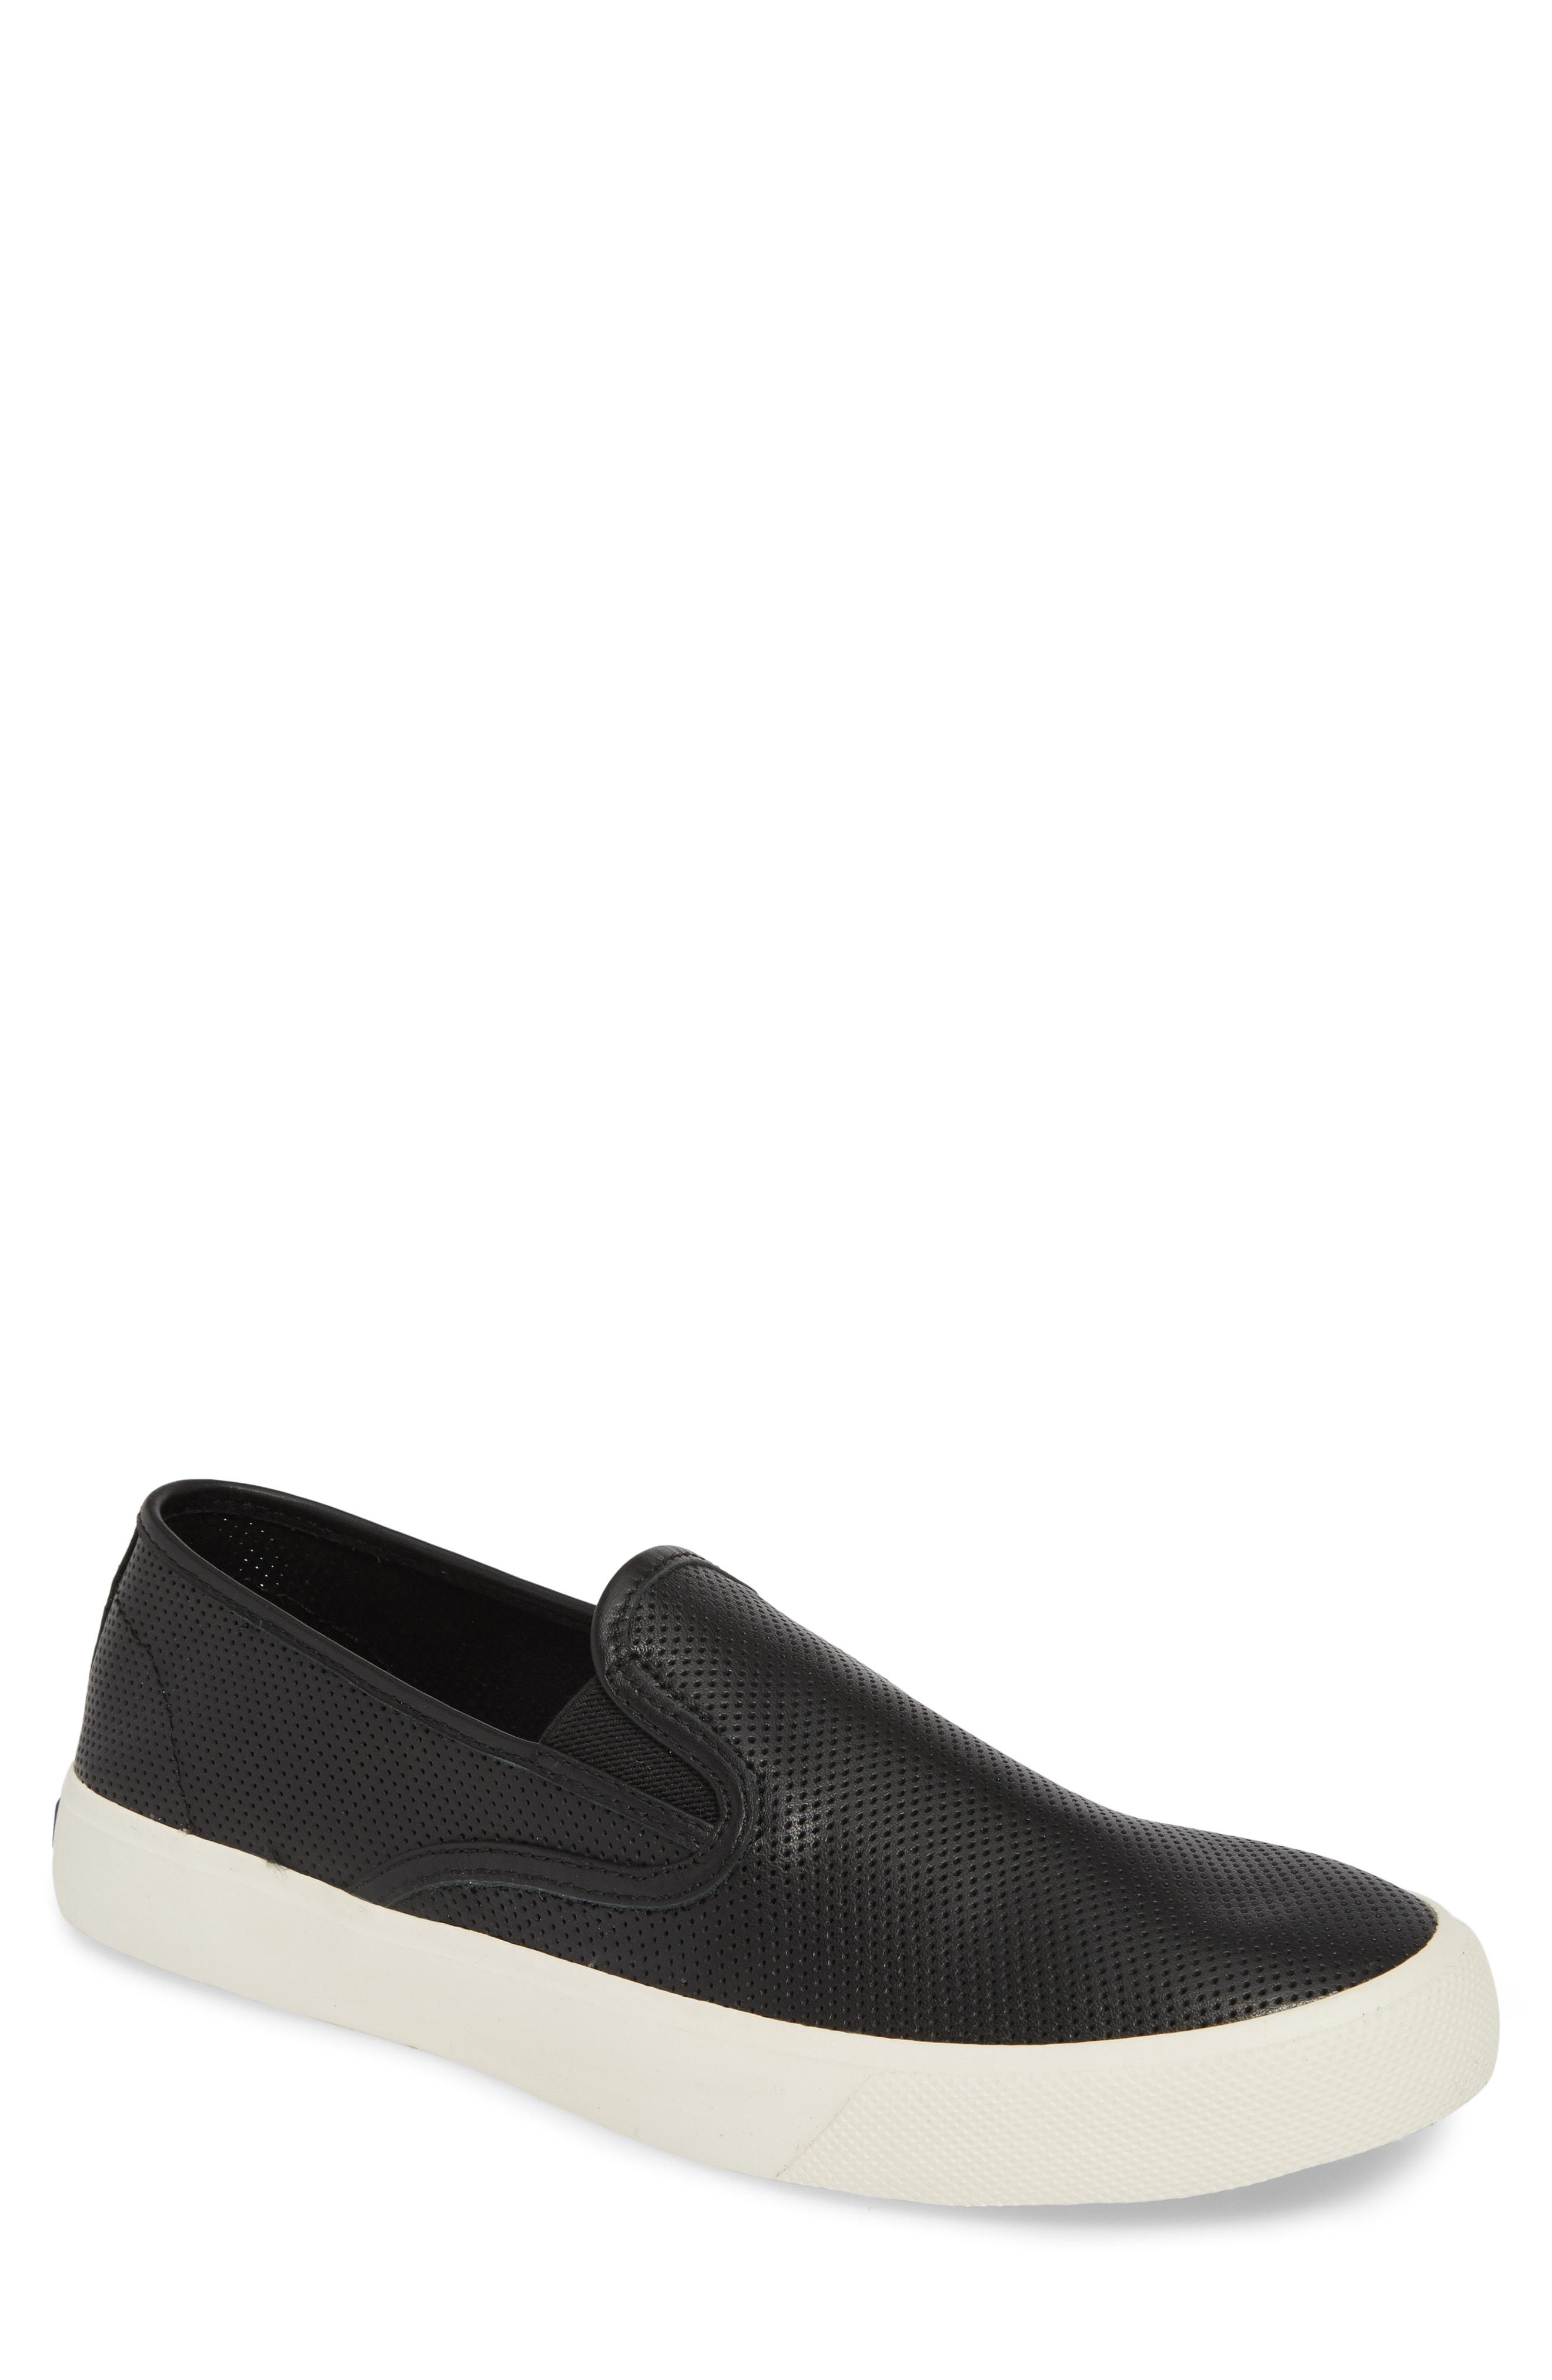 Lyst - Sperry Top-Sider Captain's Perforated Slip-on Sneaker in Black ...